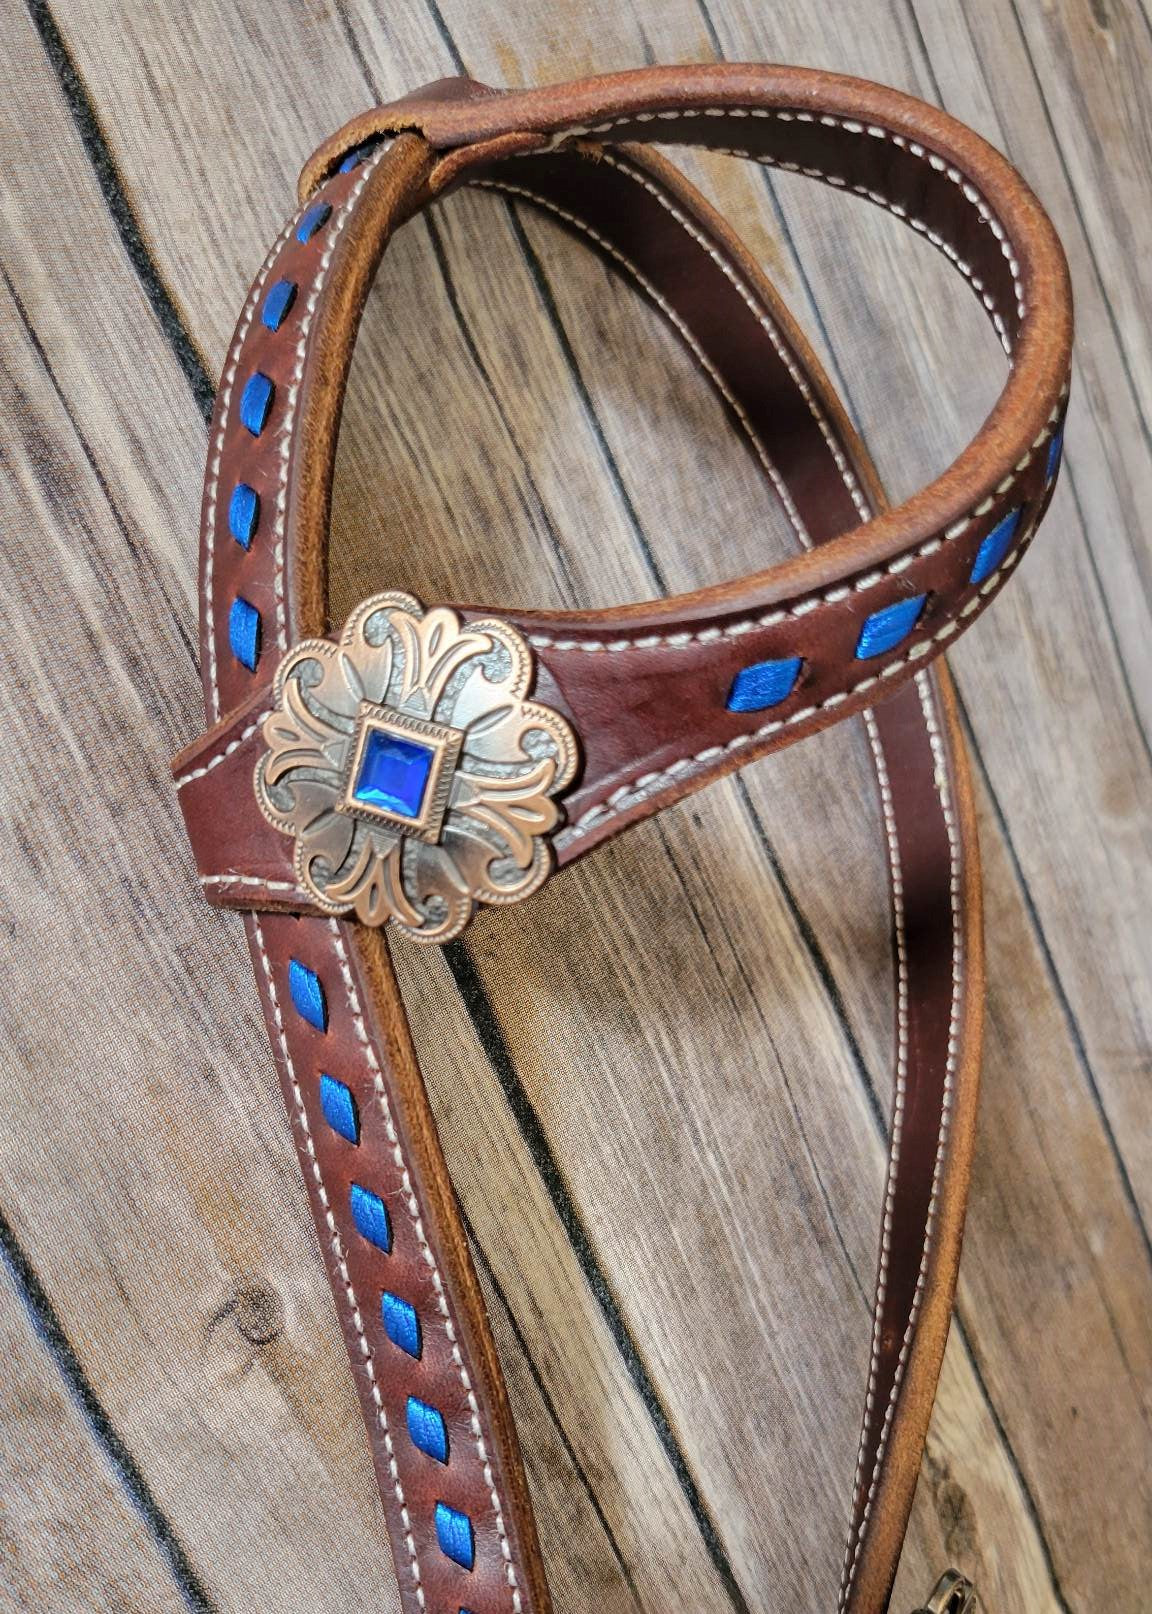 Blue Buckstitched Floral Headstall